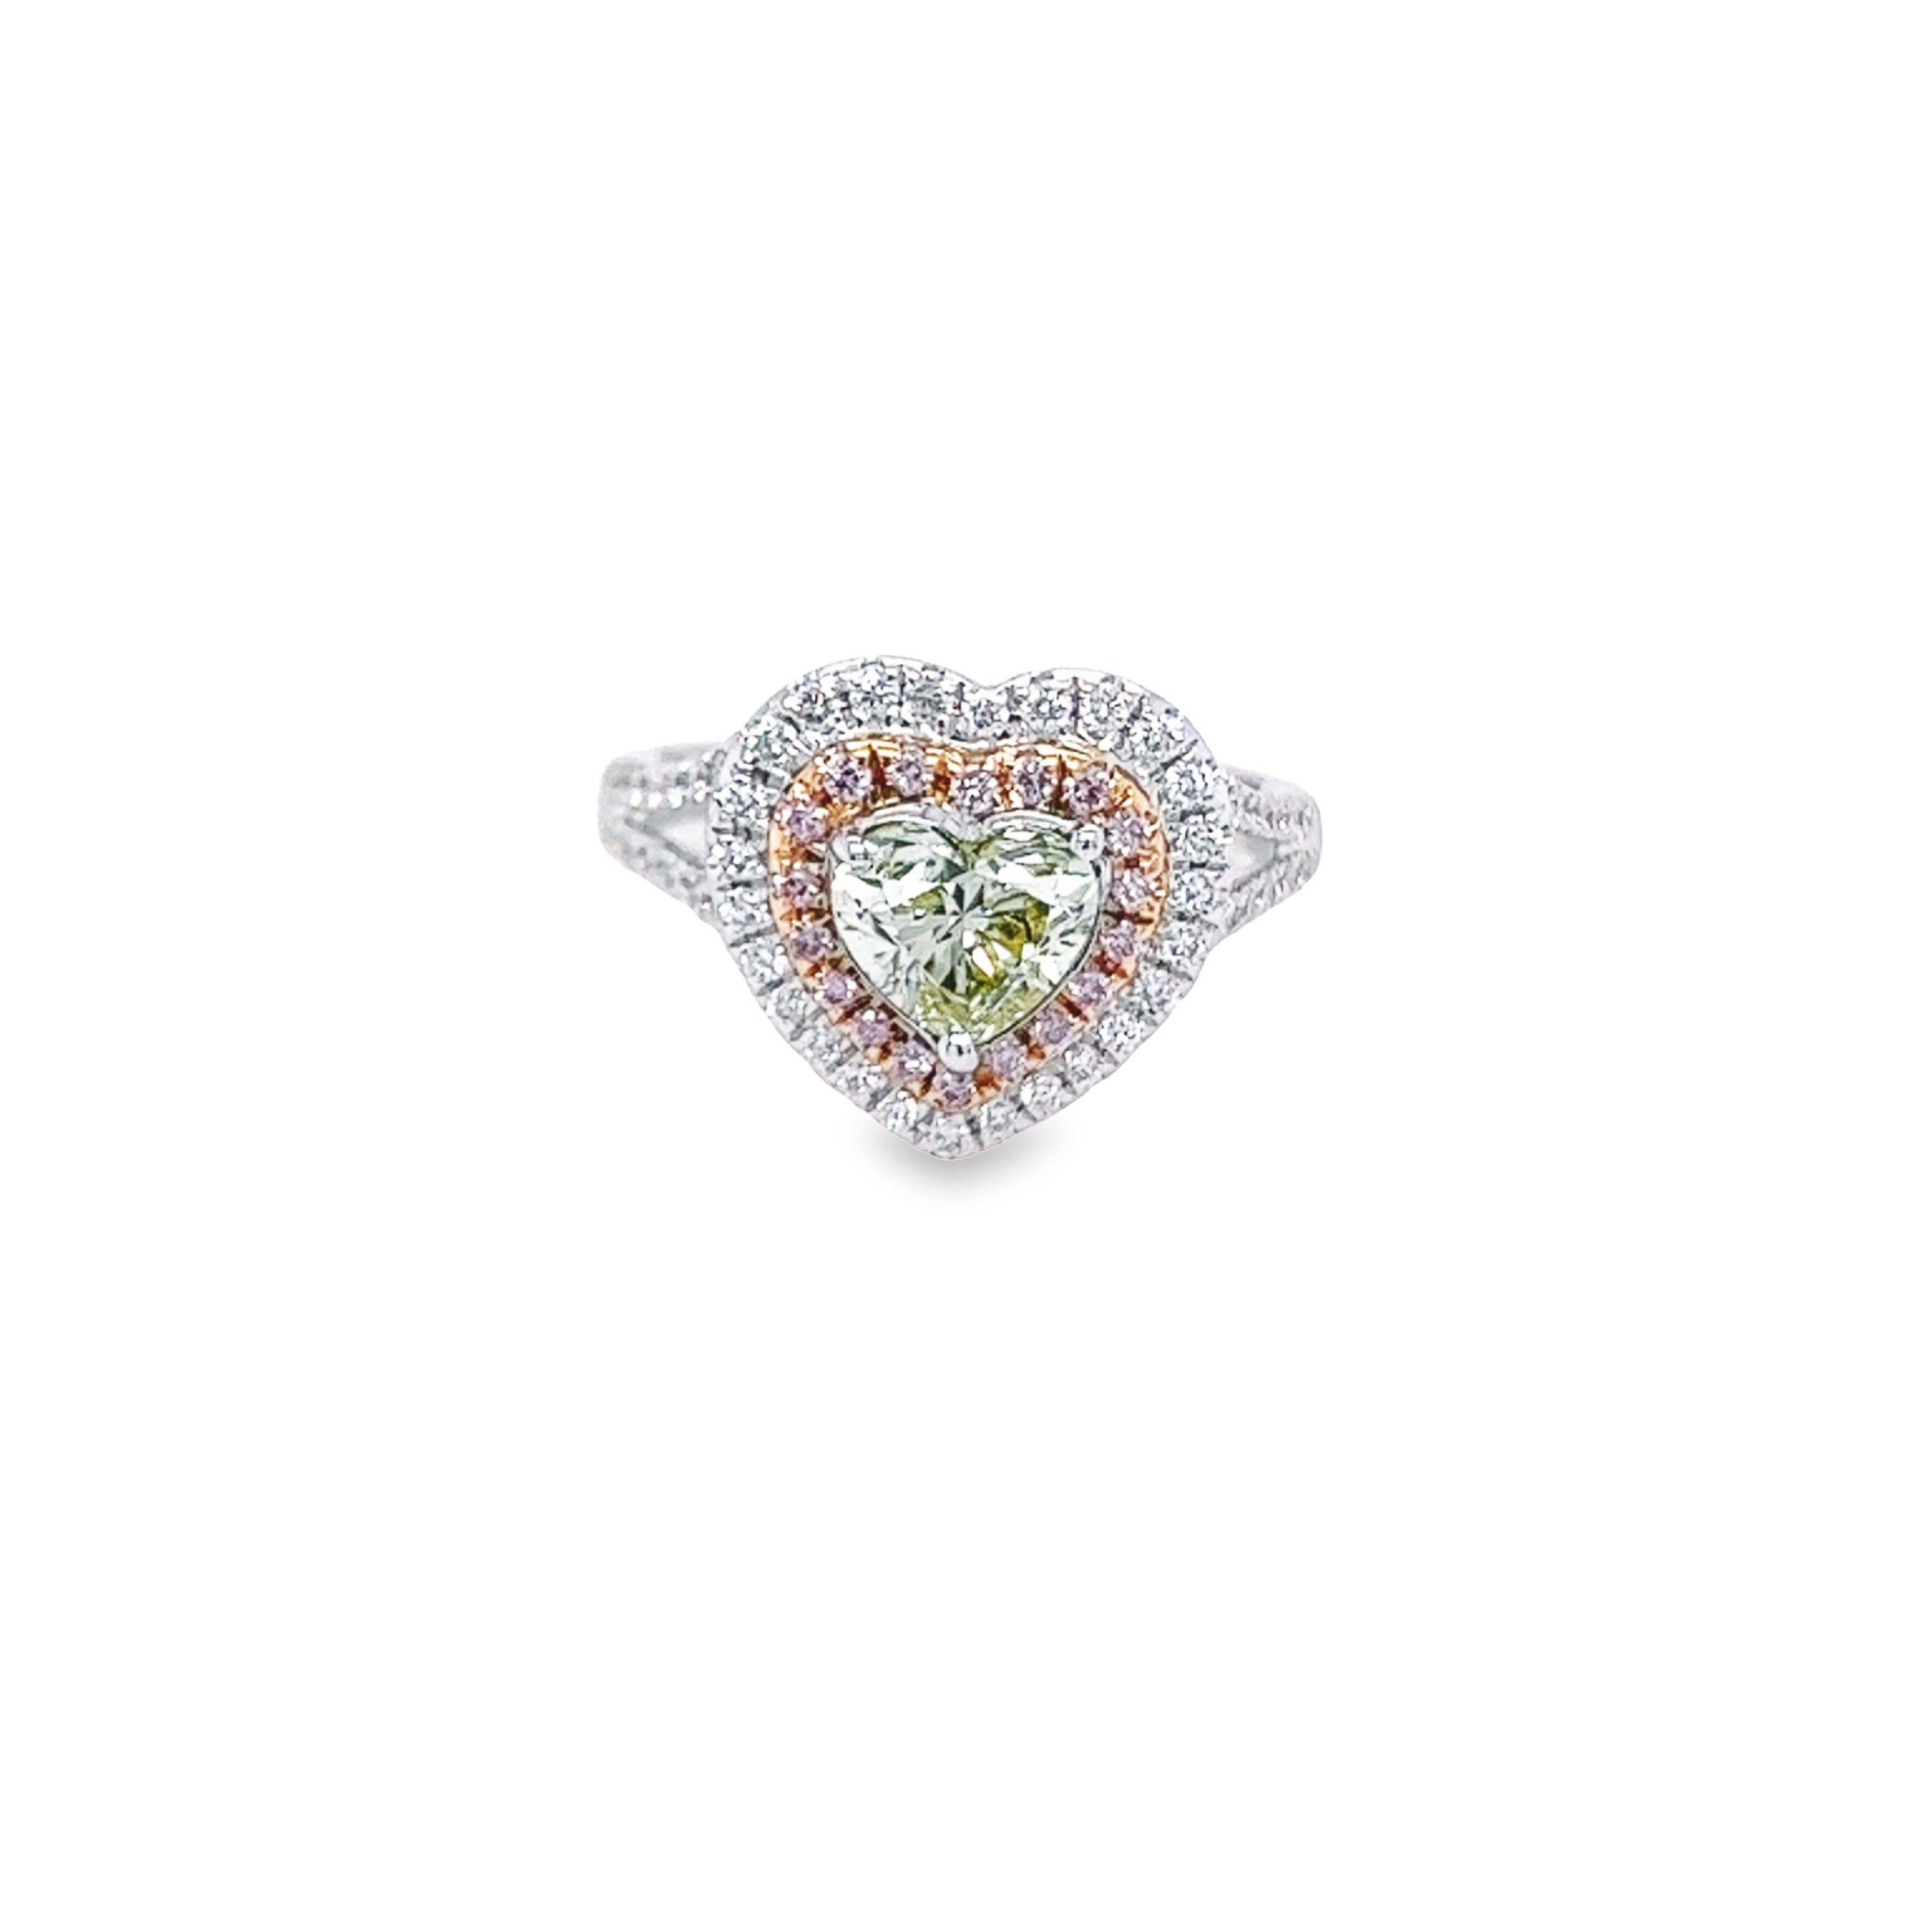 Rosenberg Diamonds & Co. 1.00 carat Heart Shape Fancy Green Yellow SI2 clarity is accompanied by a GIA certificate. This beautiful Heart is set in a handmade 18k white gold setting and completes the look with a beautiful double halo of .43 carat